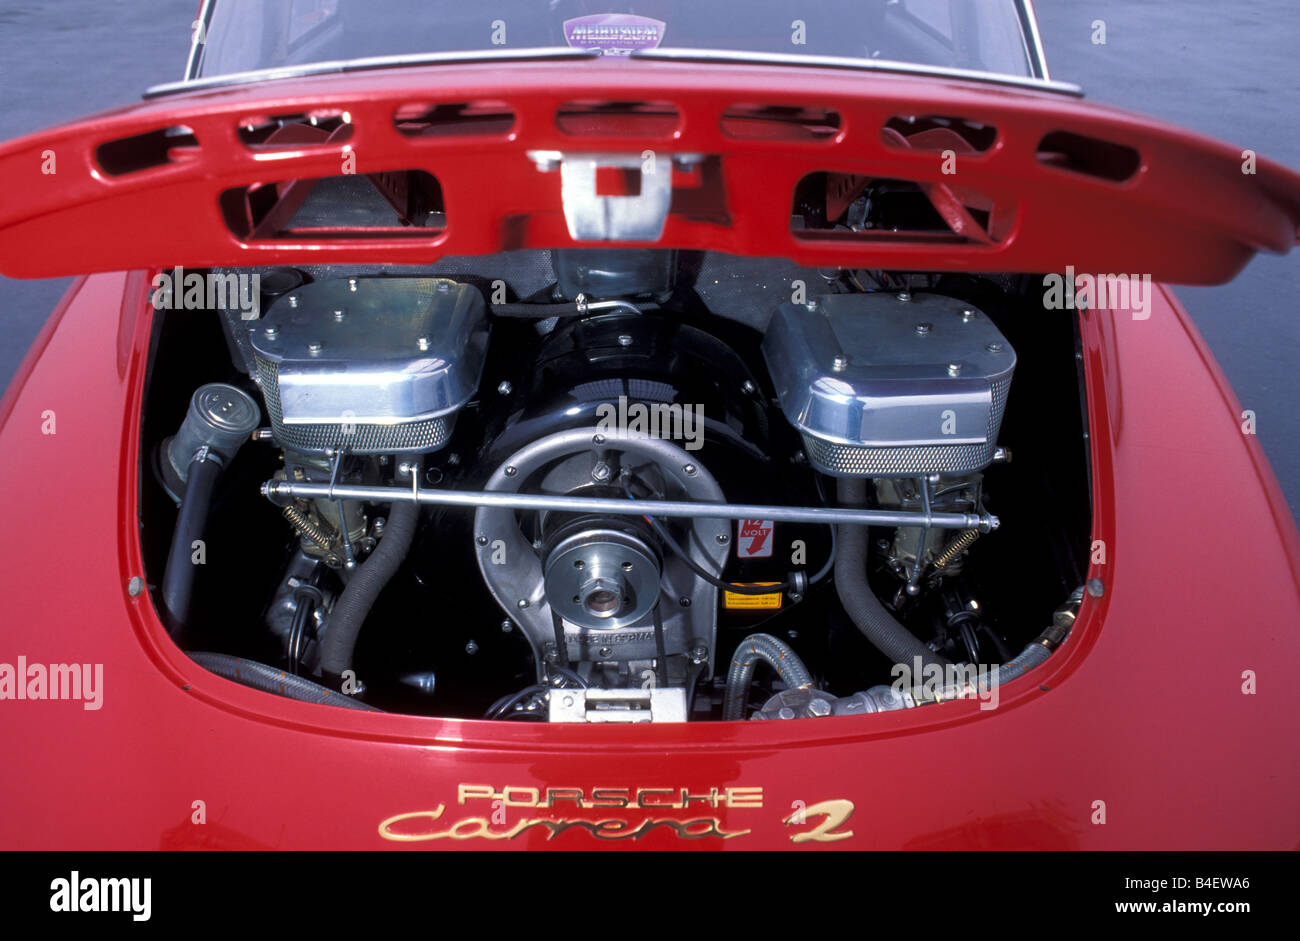 Car, Porsche 356 Carrera 2, model year 1963, red, sports car, Coupé, Coupe, red, vintage car, 1960s, sixties, engine compartment Stock Photo